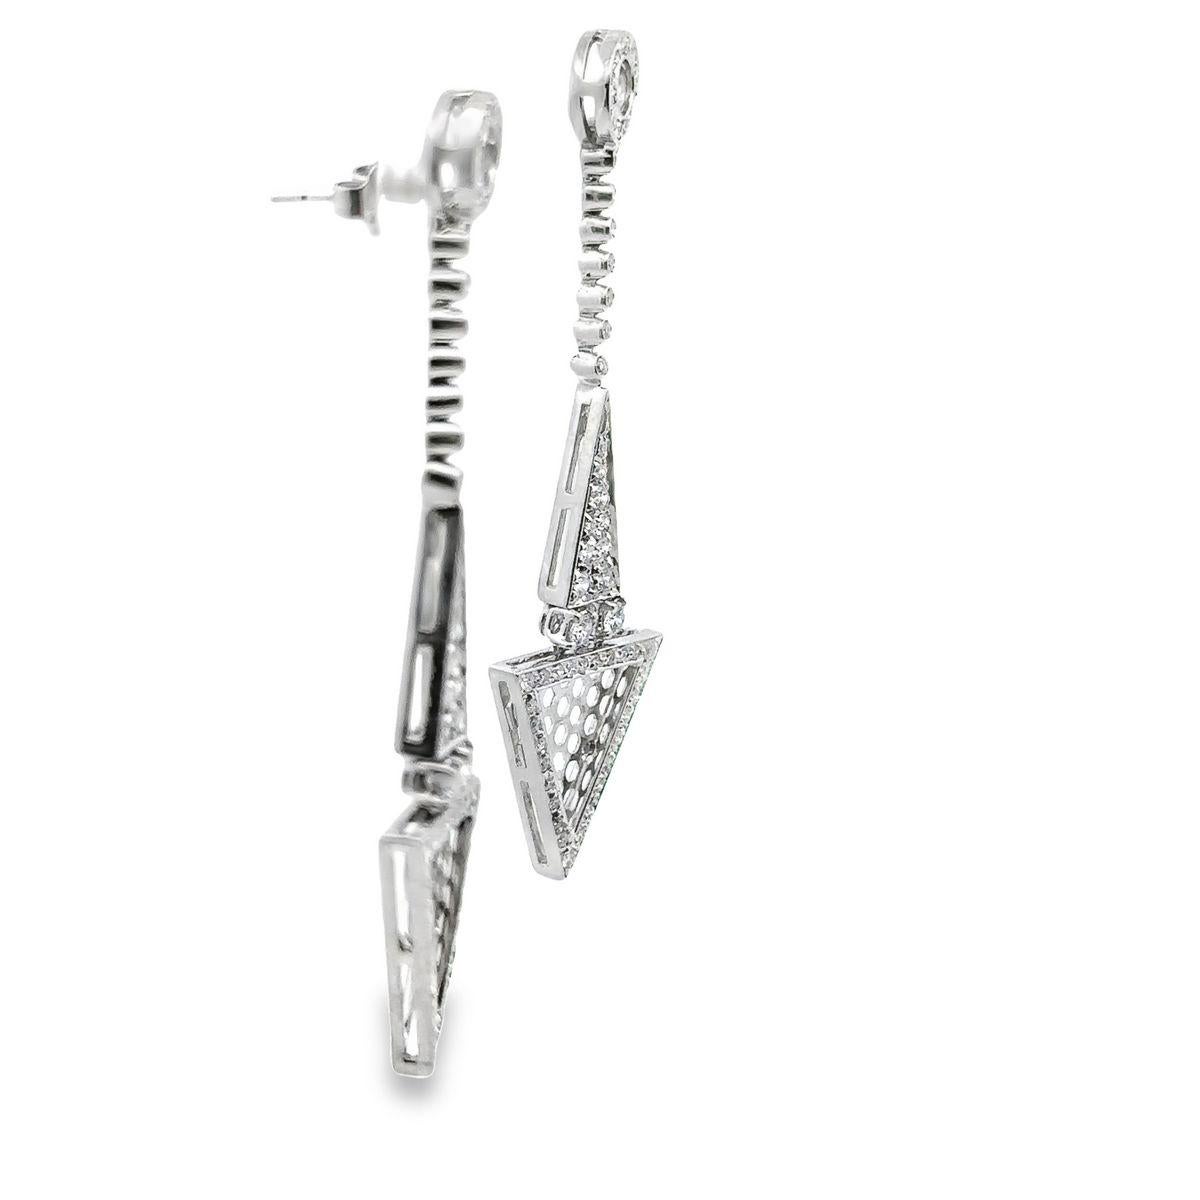 Modern Geometric Diamond 18K White Gold Dangling Drop Earrings  In Excellent Condition For Sale In Newton, MA